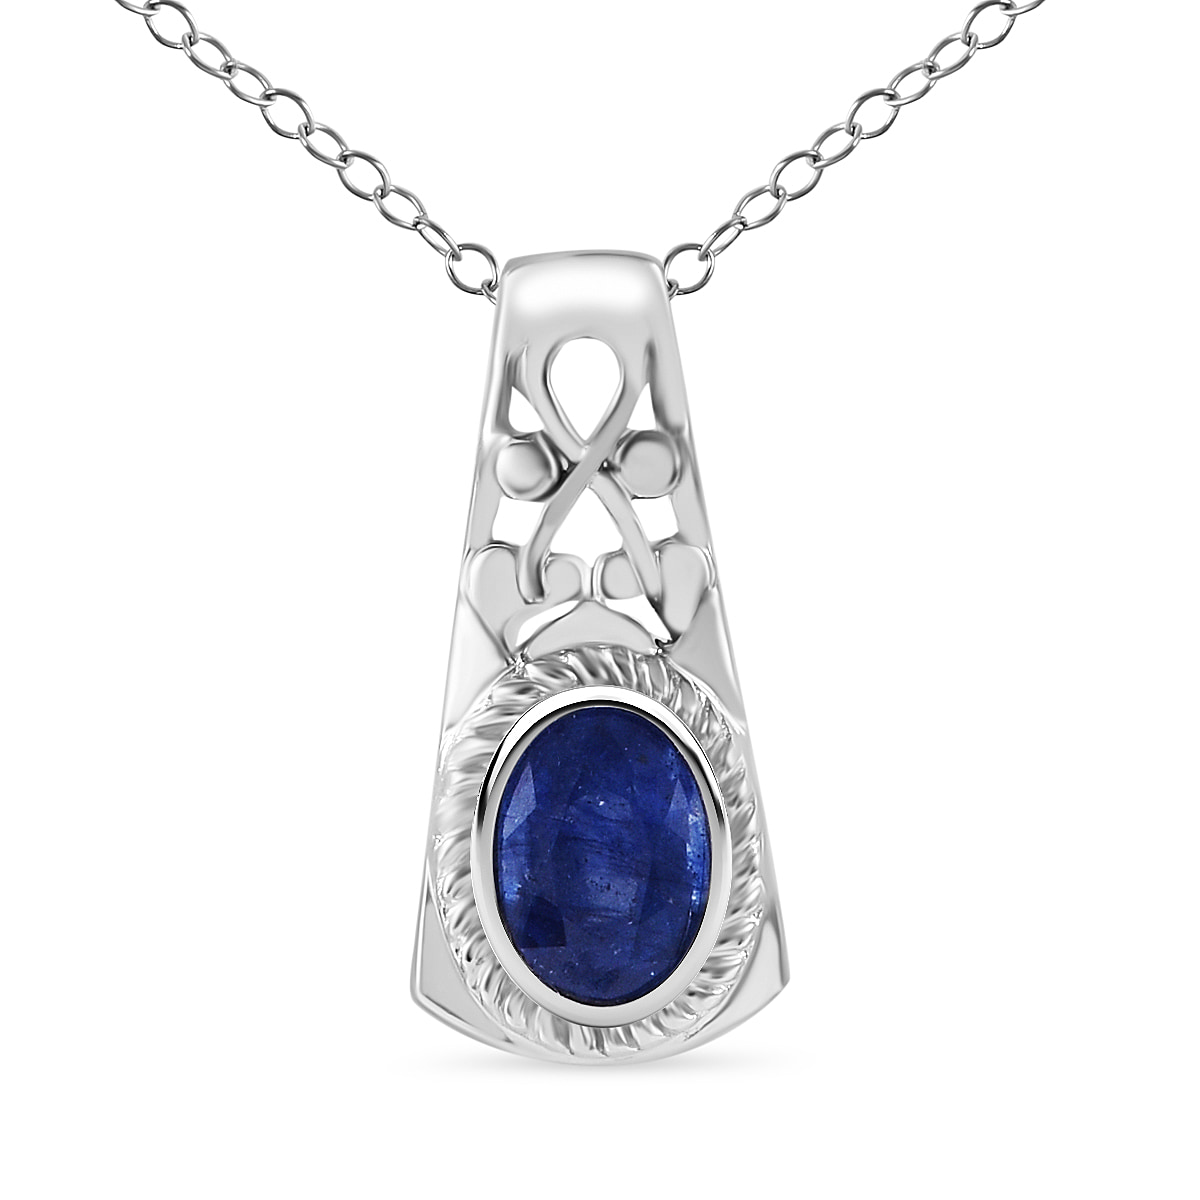 Masoala Sapphire Pendant with Chain (Size 18) in Rhodium Overlay Sterling Silver 1.17 Ct.